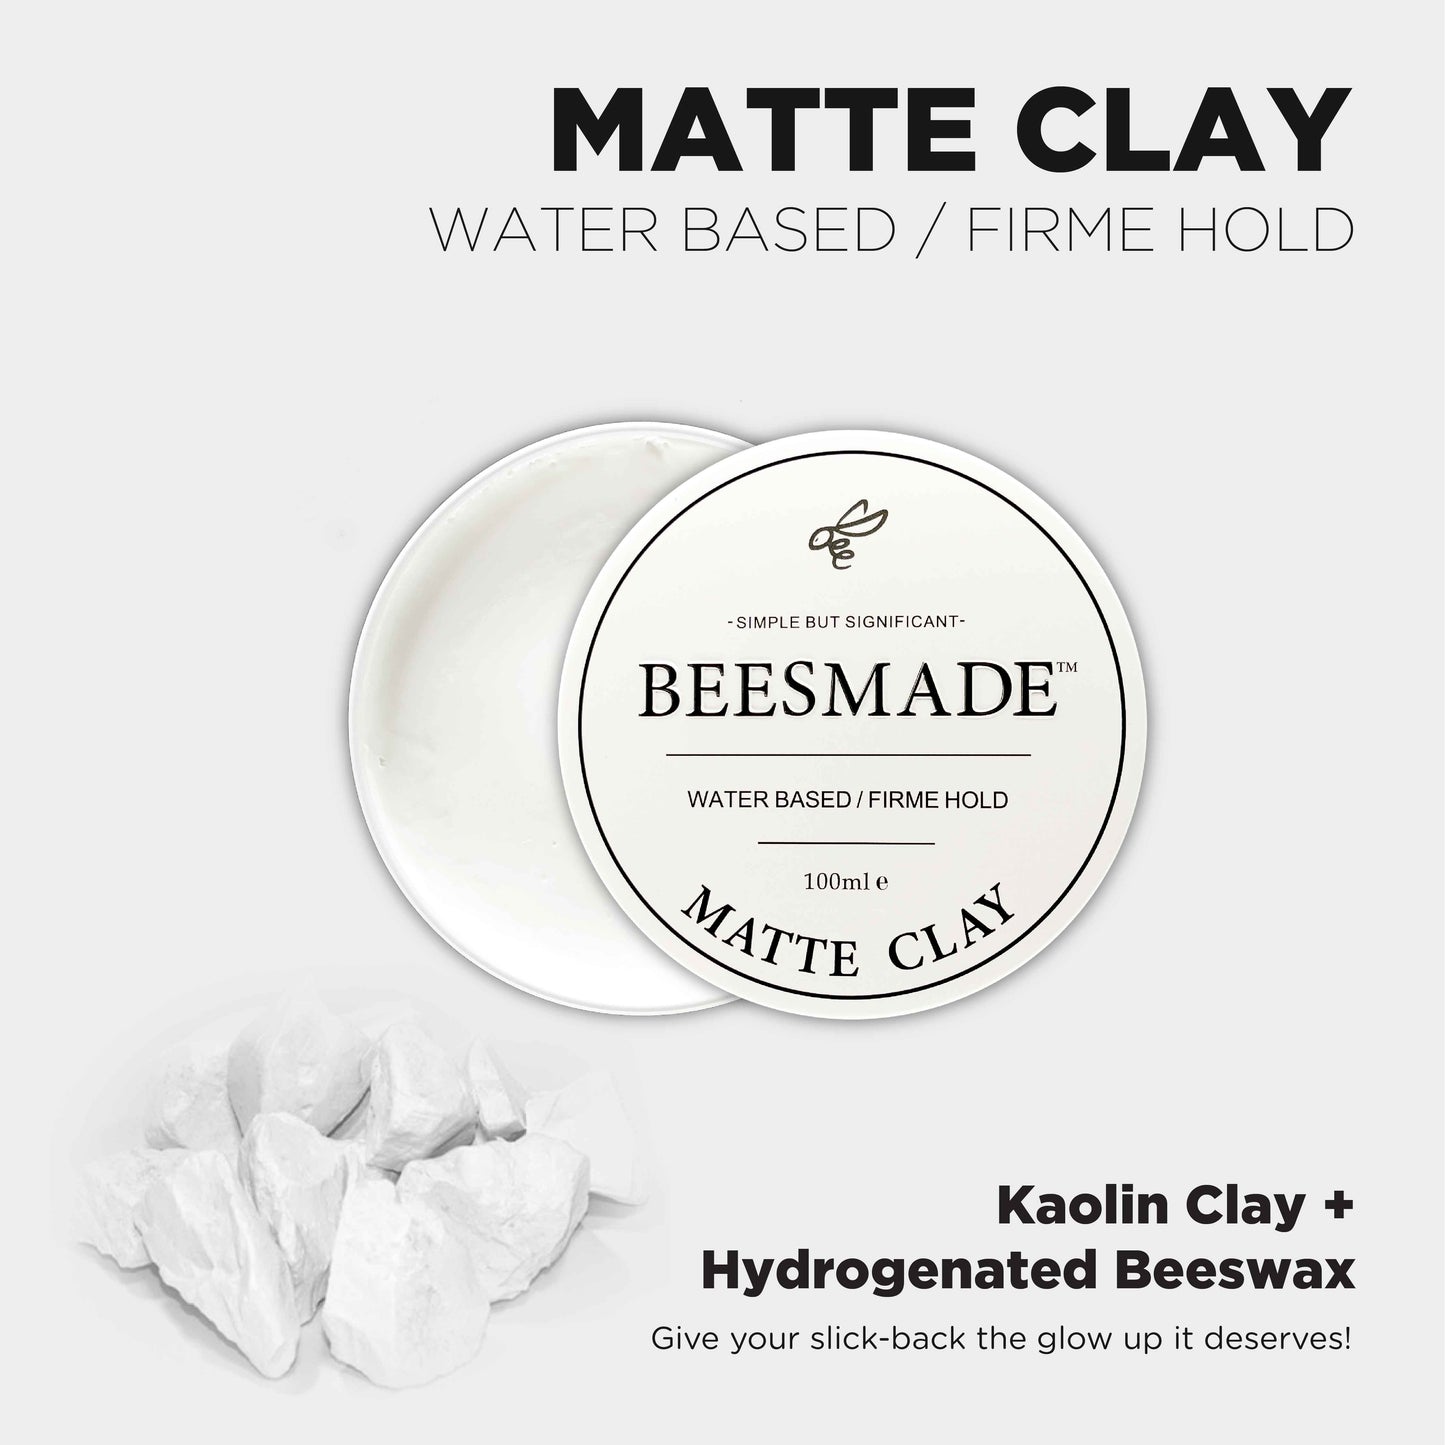 BEESMADE Matte Clay - No.1 Hair Clay in Singapore & Malaysia